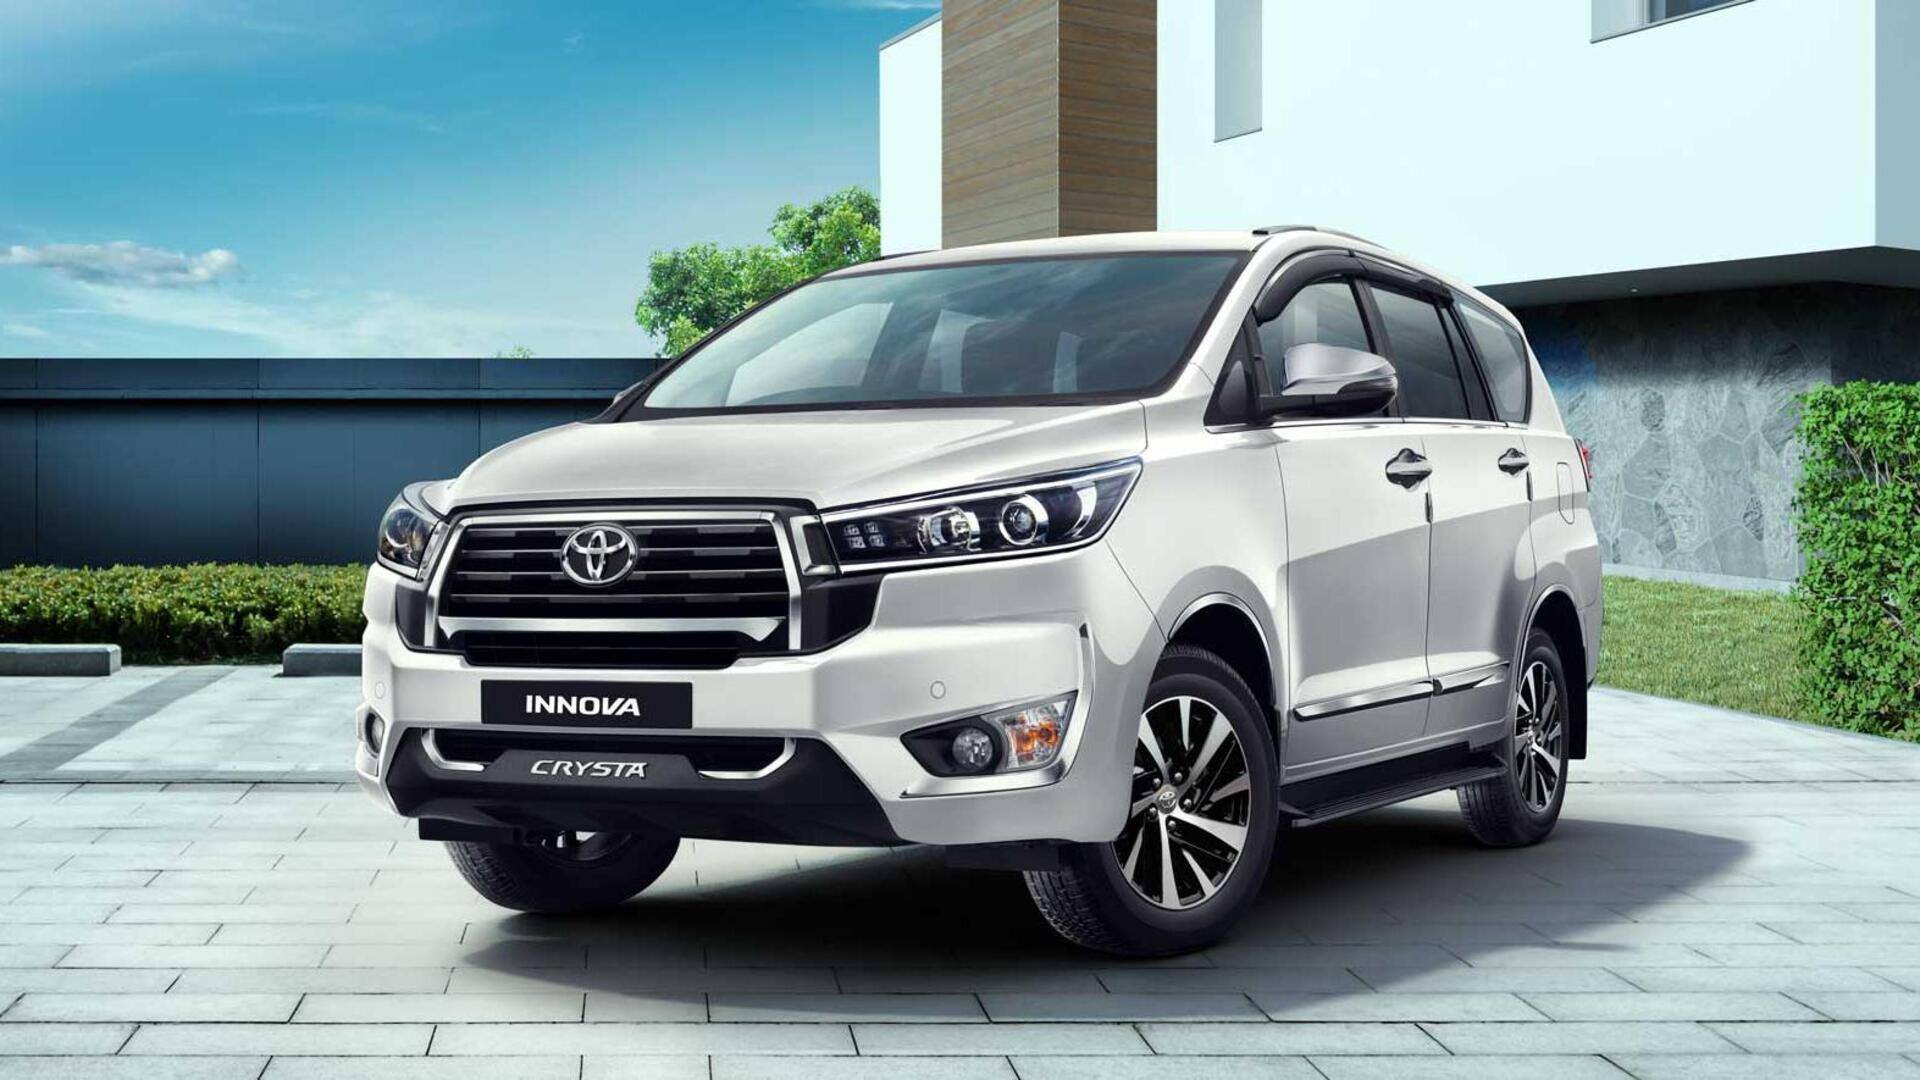 Toyota Innova Crysta is now costlier by Rs. 25,000 